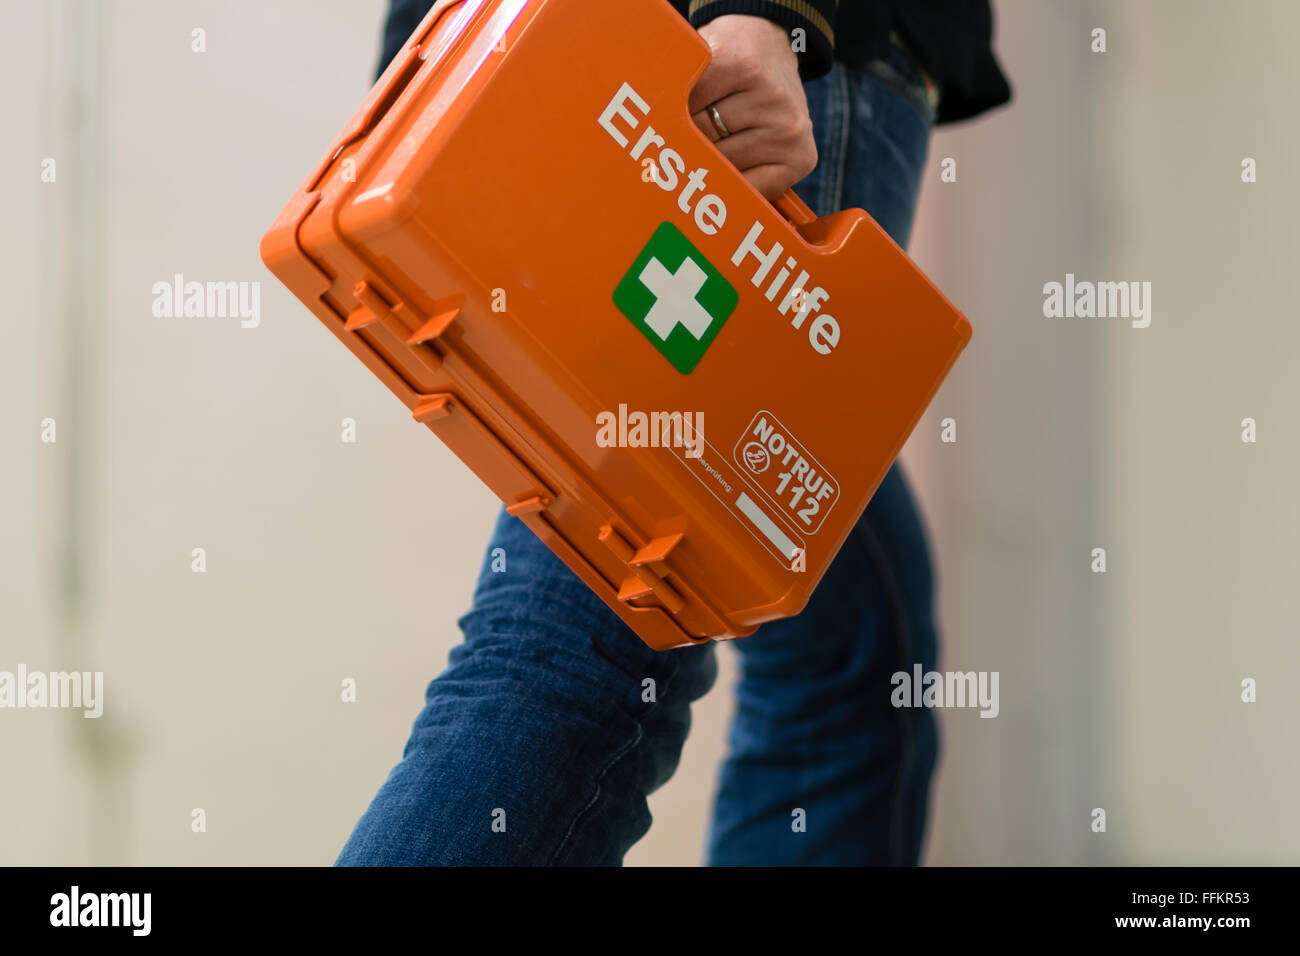 First aid after an accident at work. First responder with first aid kit, Germany. Stock Photo